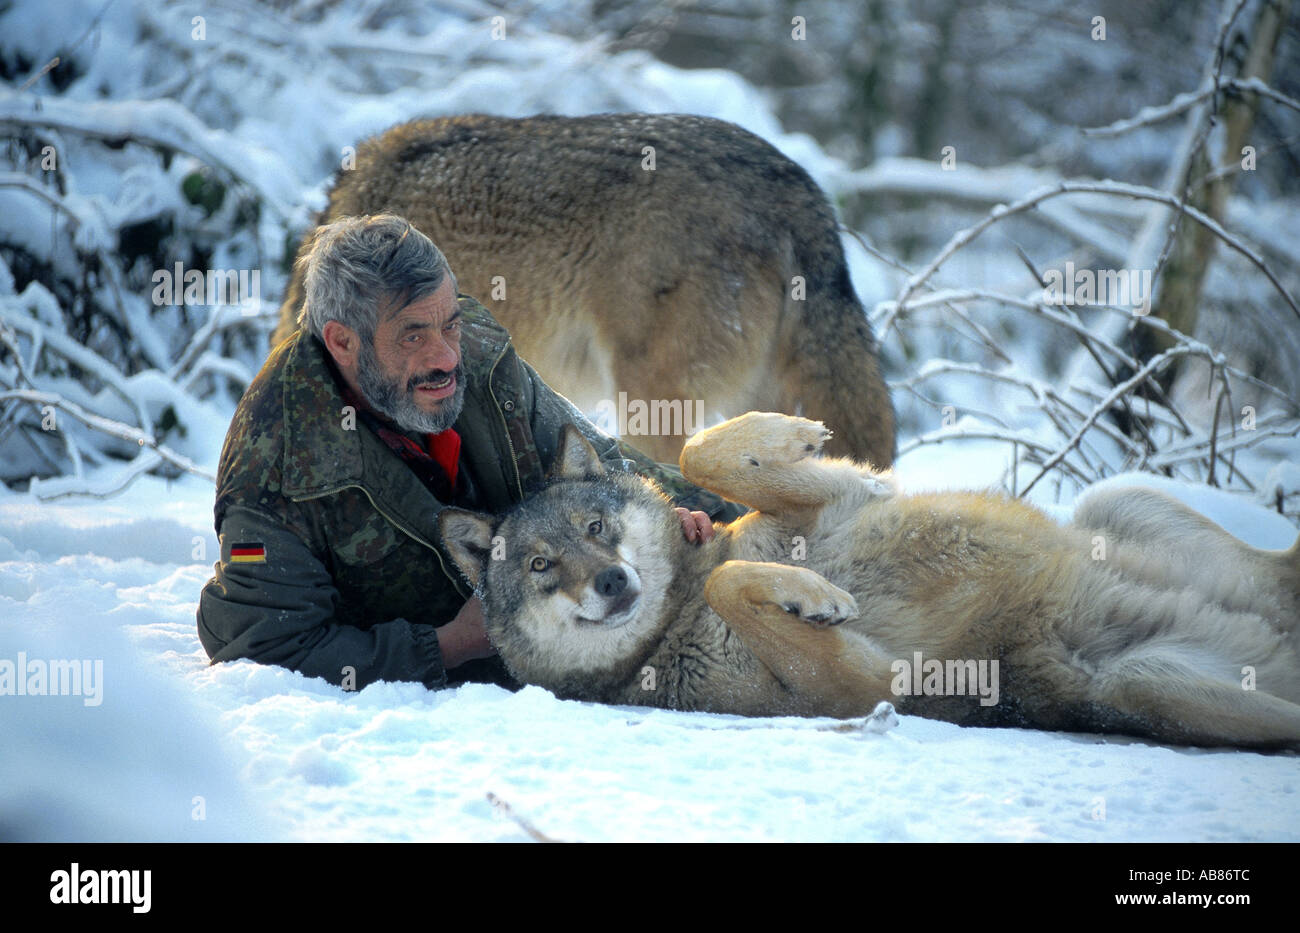 European gray wolf (Canis lupus lupus), with Werner Freund; social contact in the snow, Germany, Saarland, Merzig Stock Photo